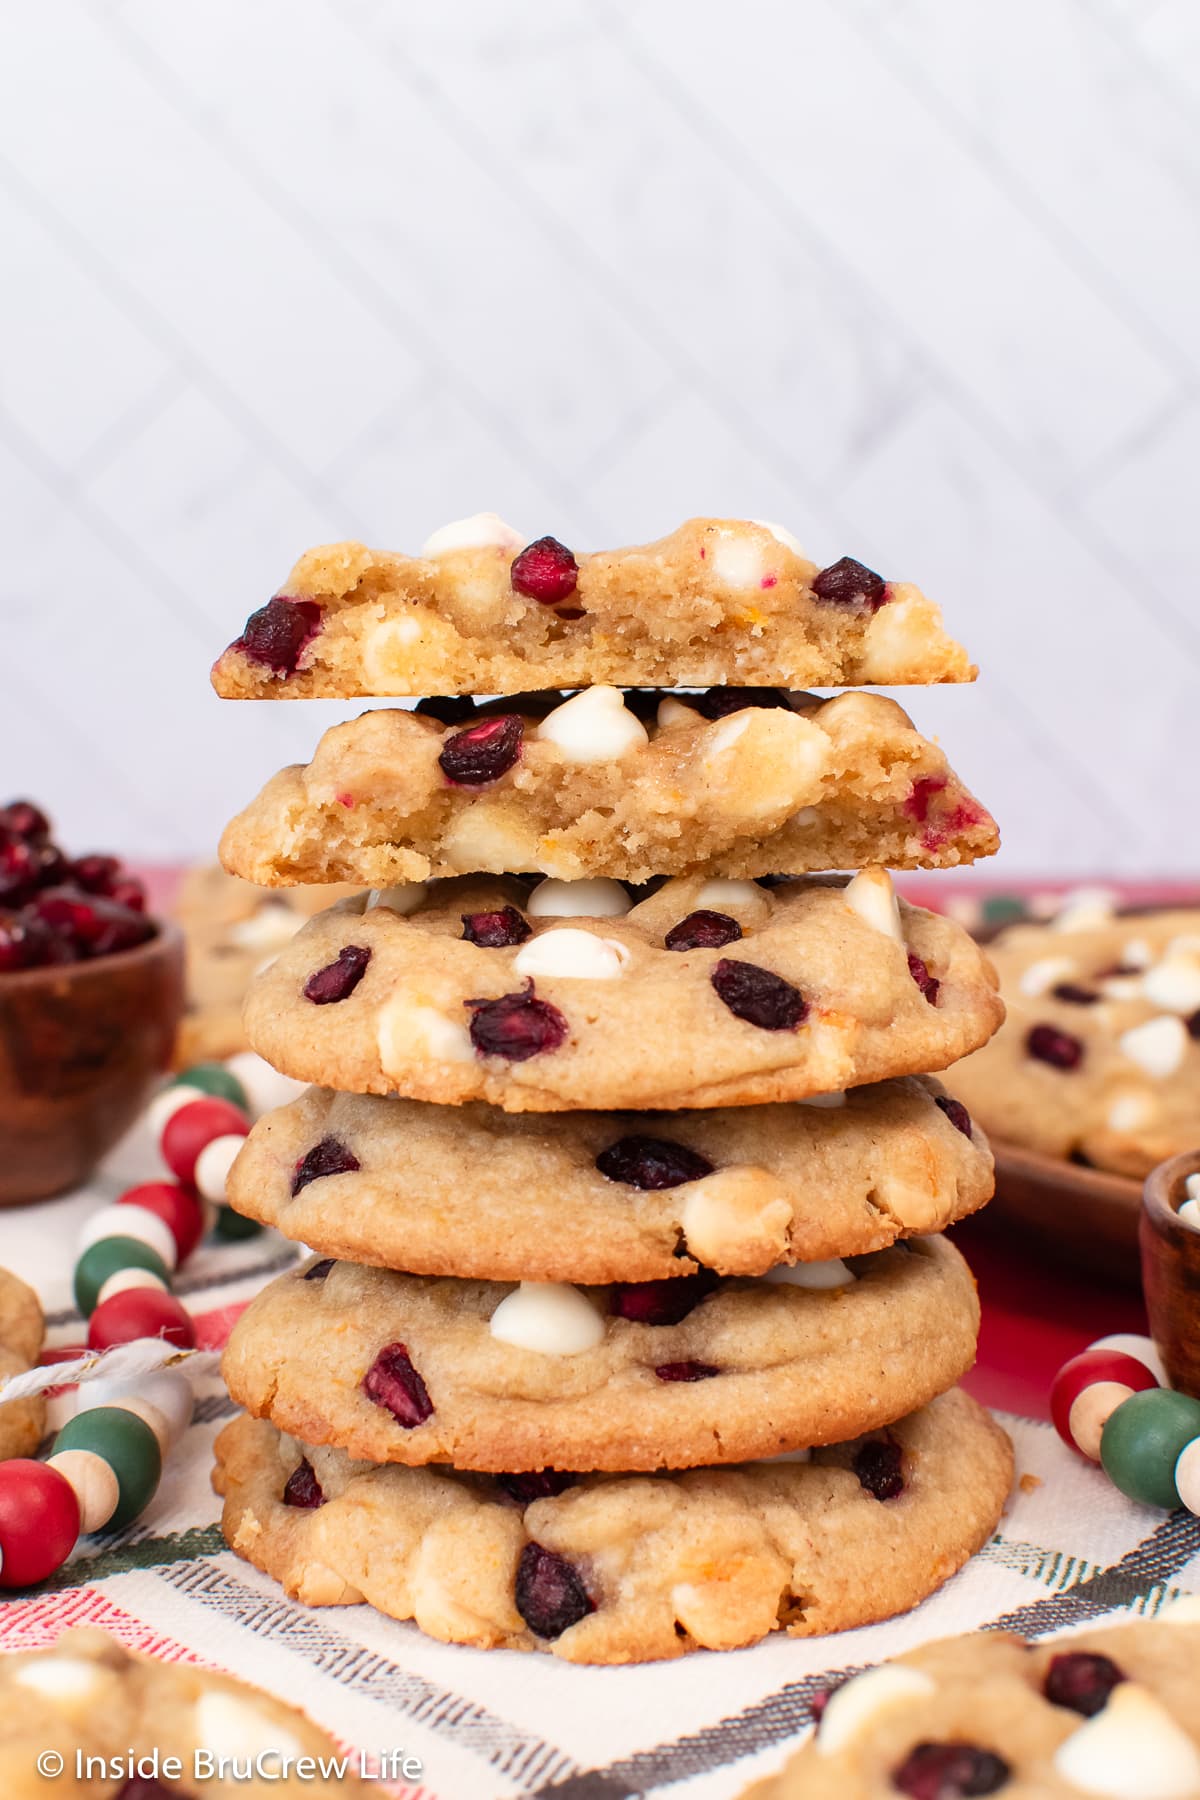 A stack of white chocolate chip cookies on a plate.